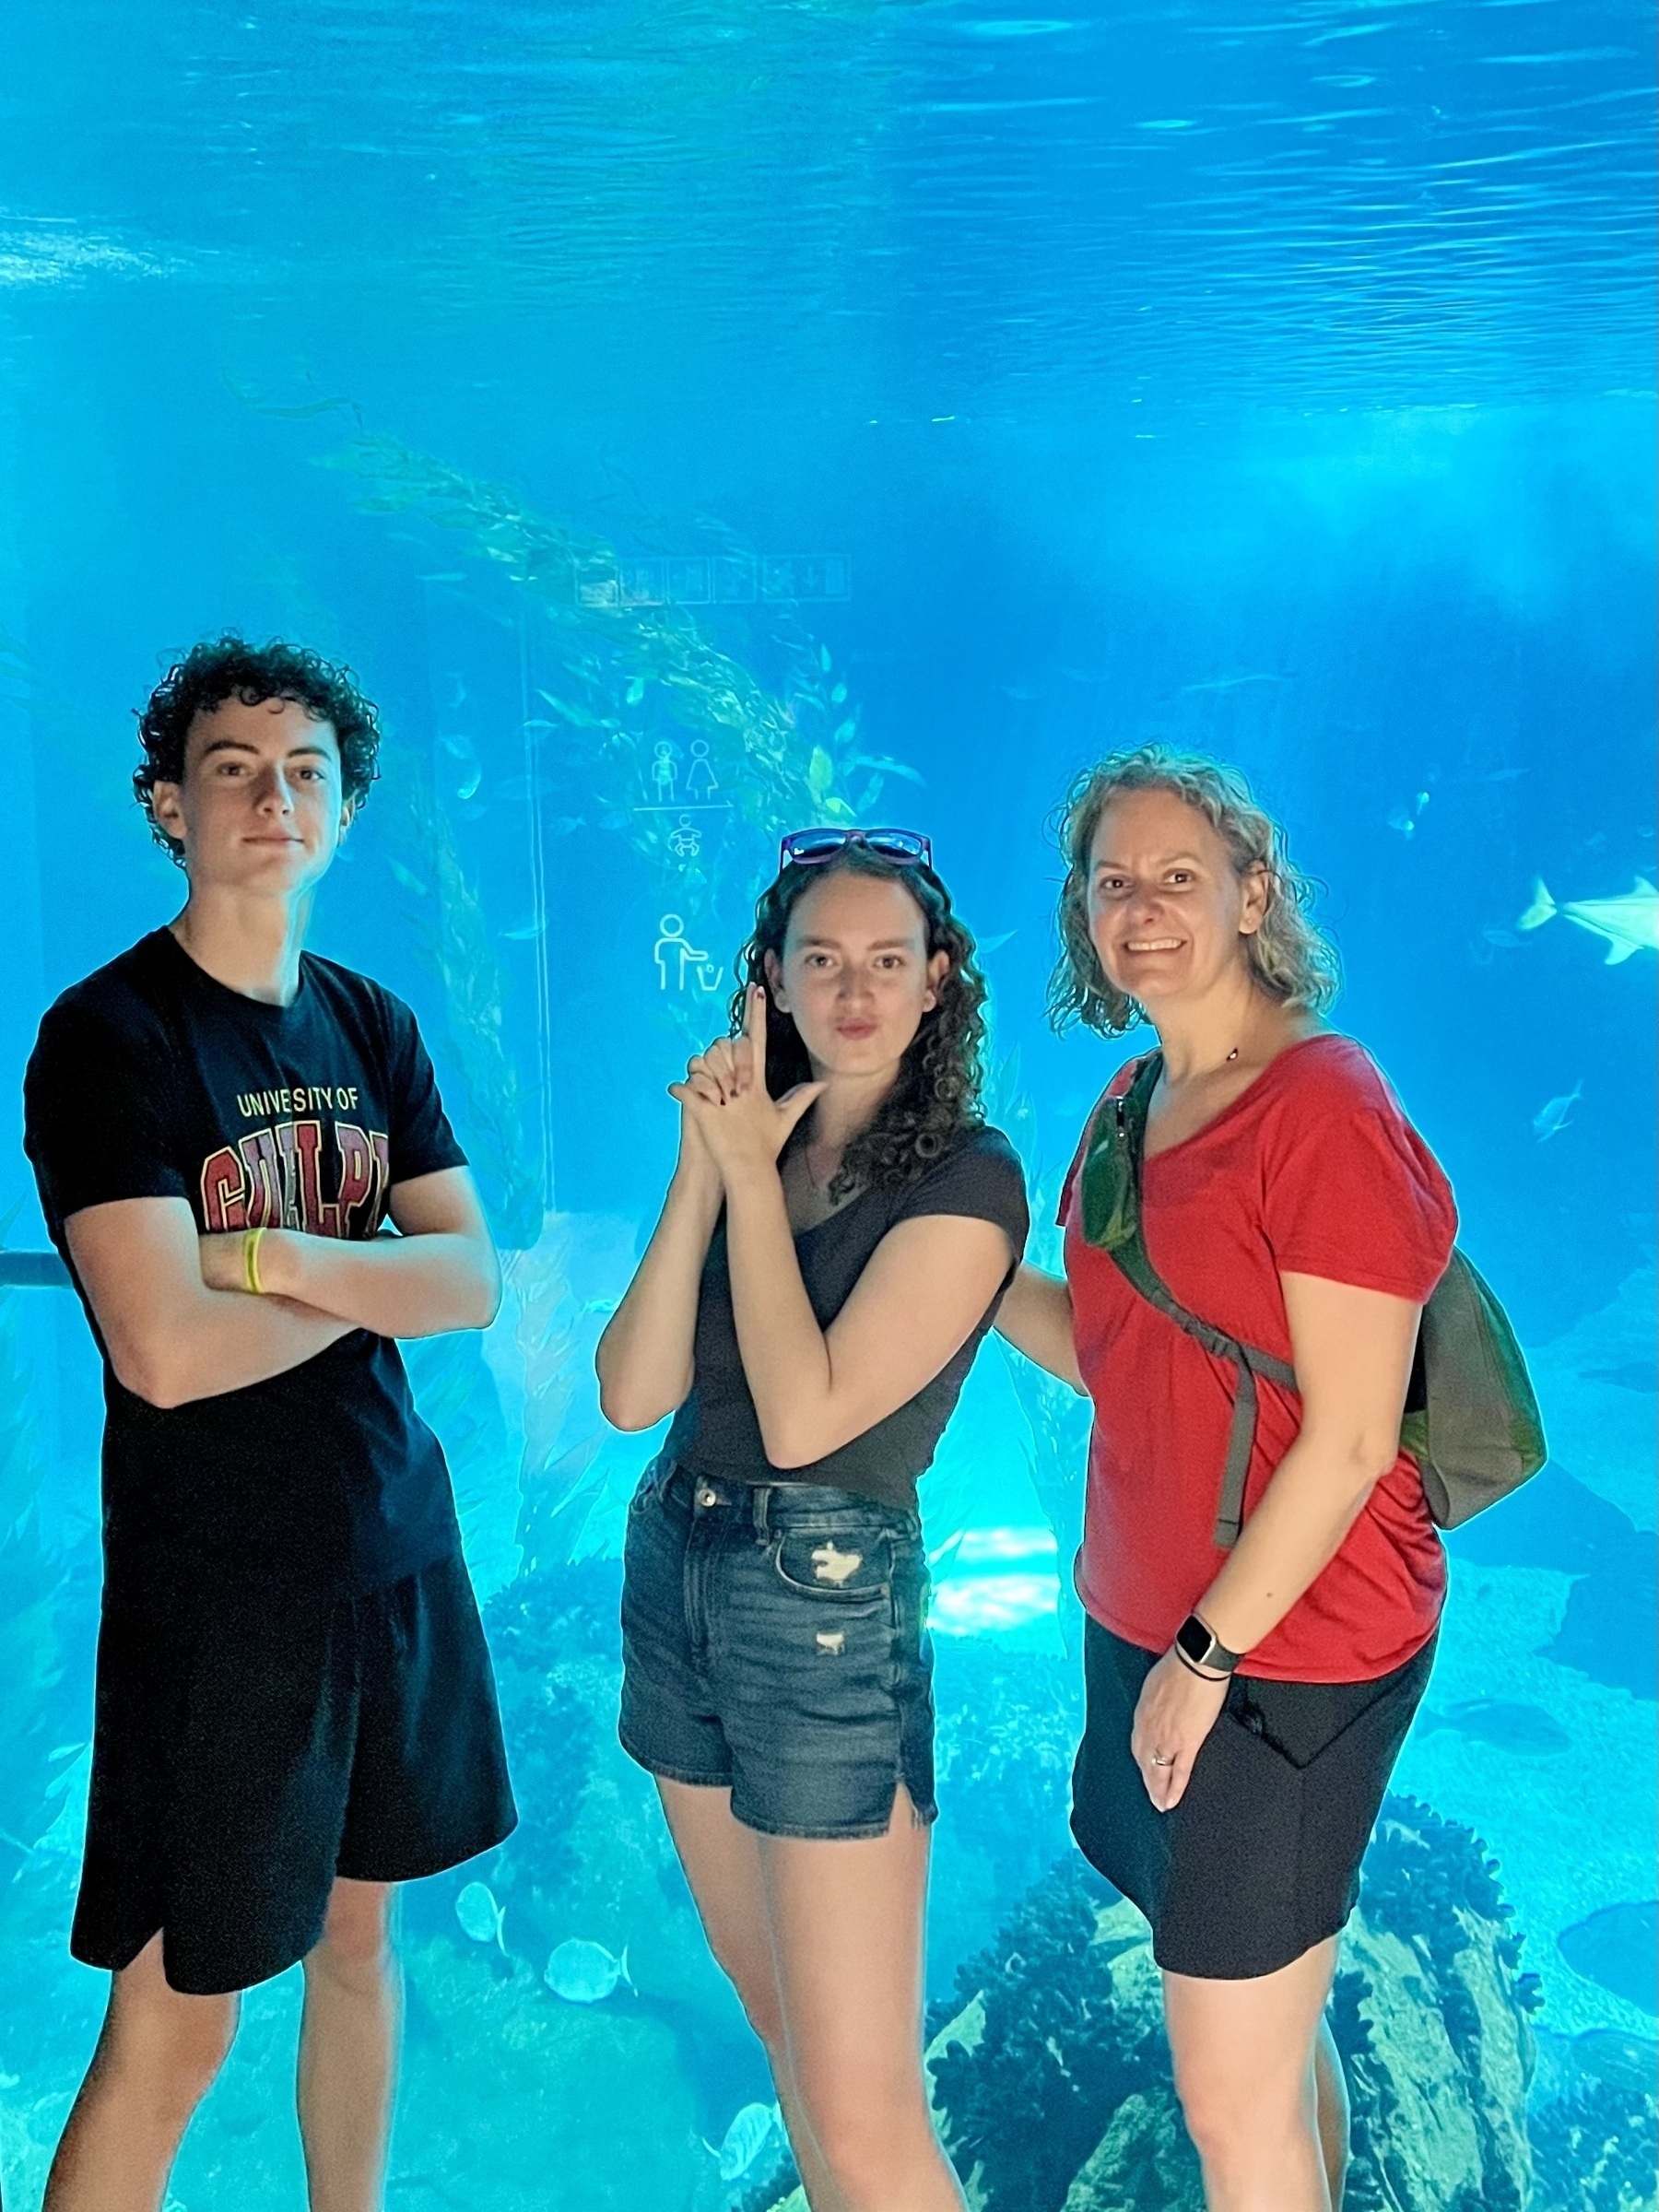 Three individuals pose in front of an aquarium with various fish and underwater flora, giving a sense of a leisure visit to a marine exhibit.